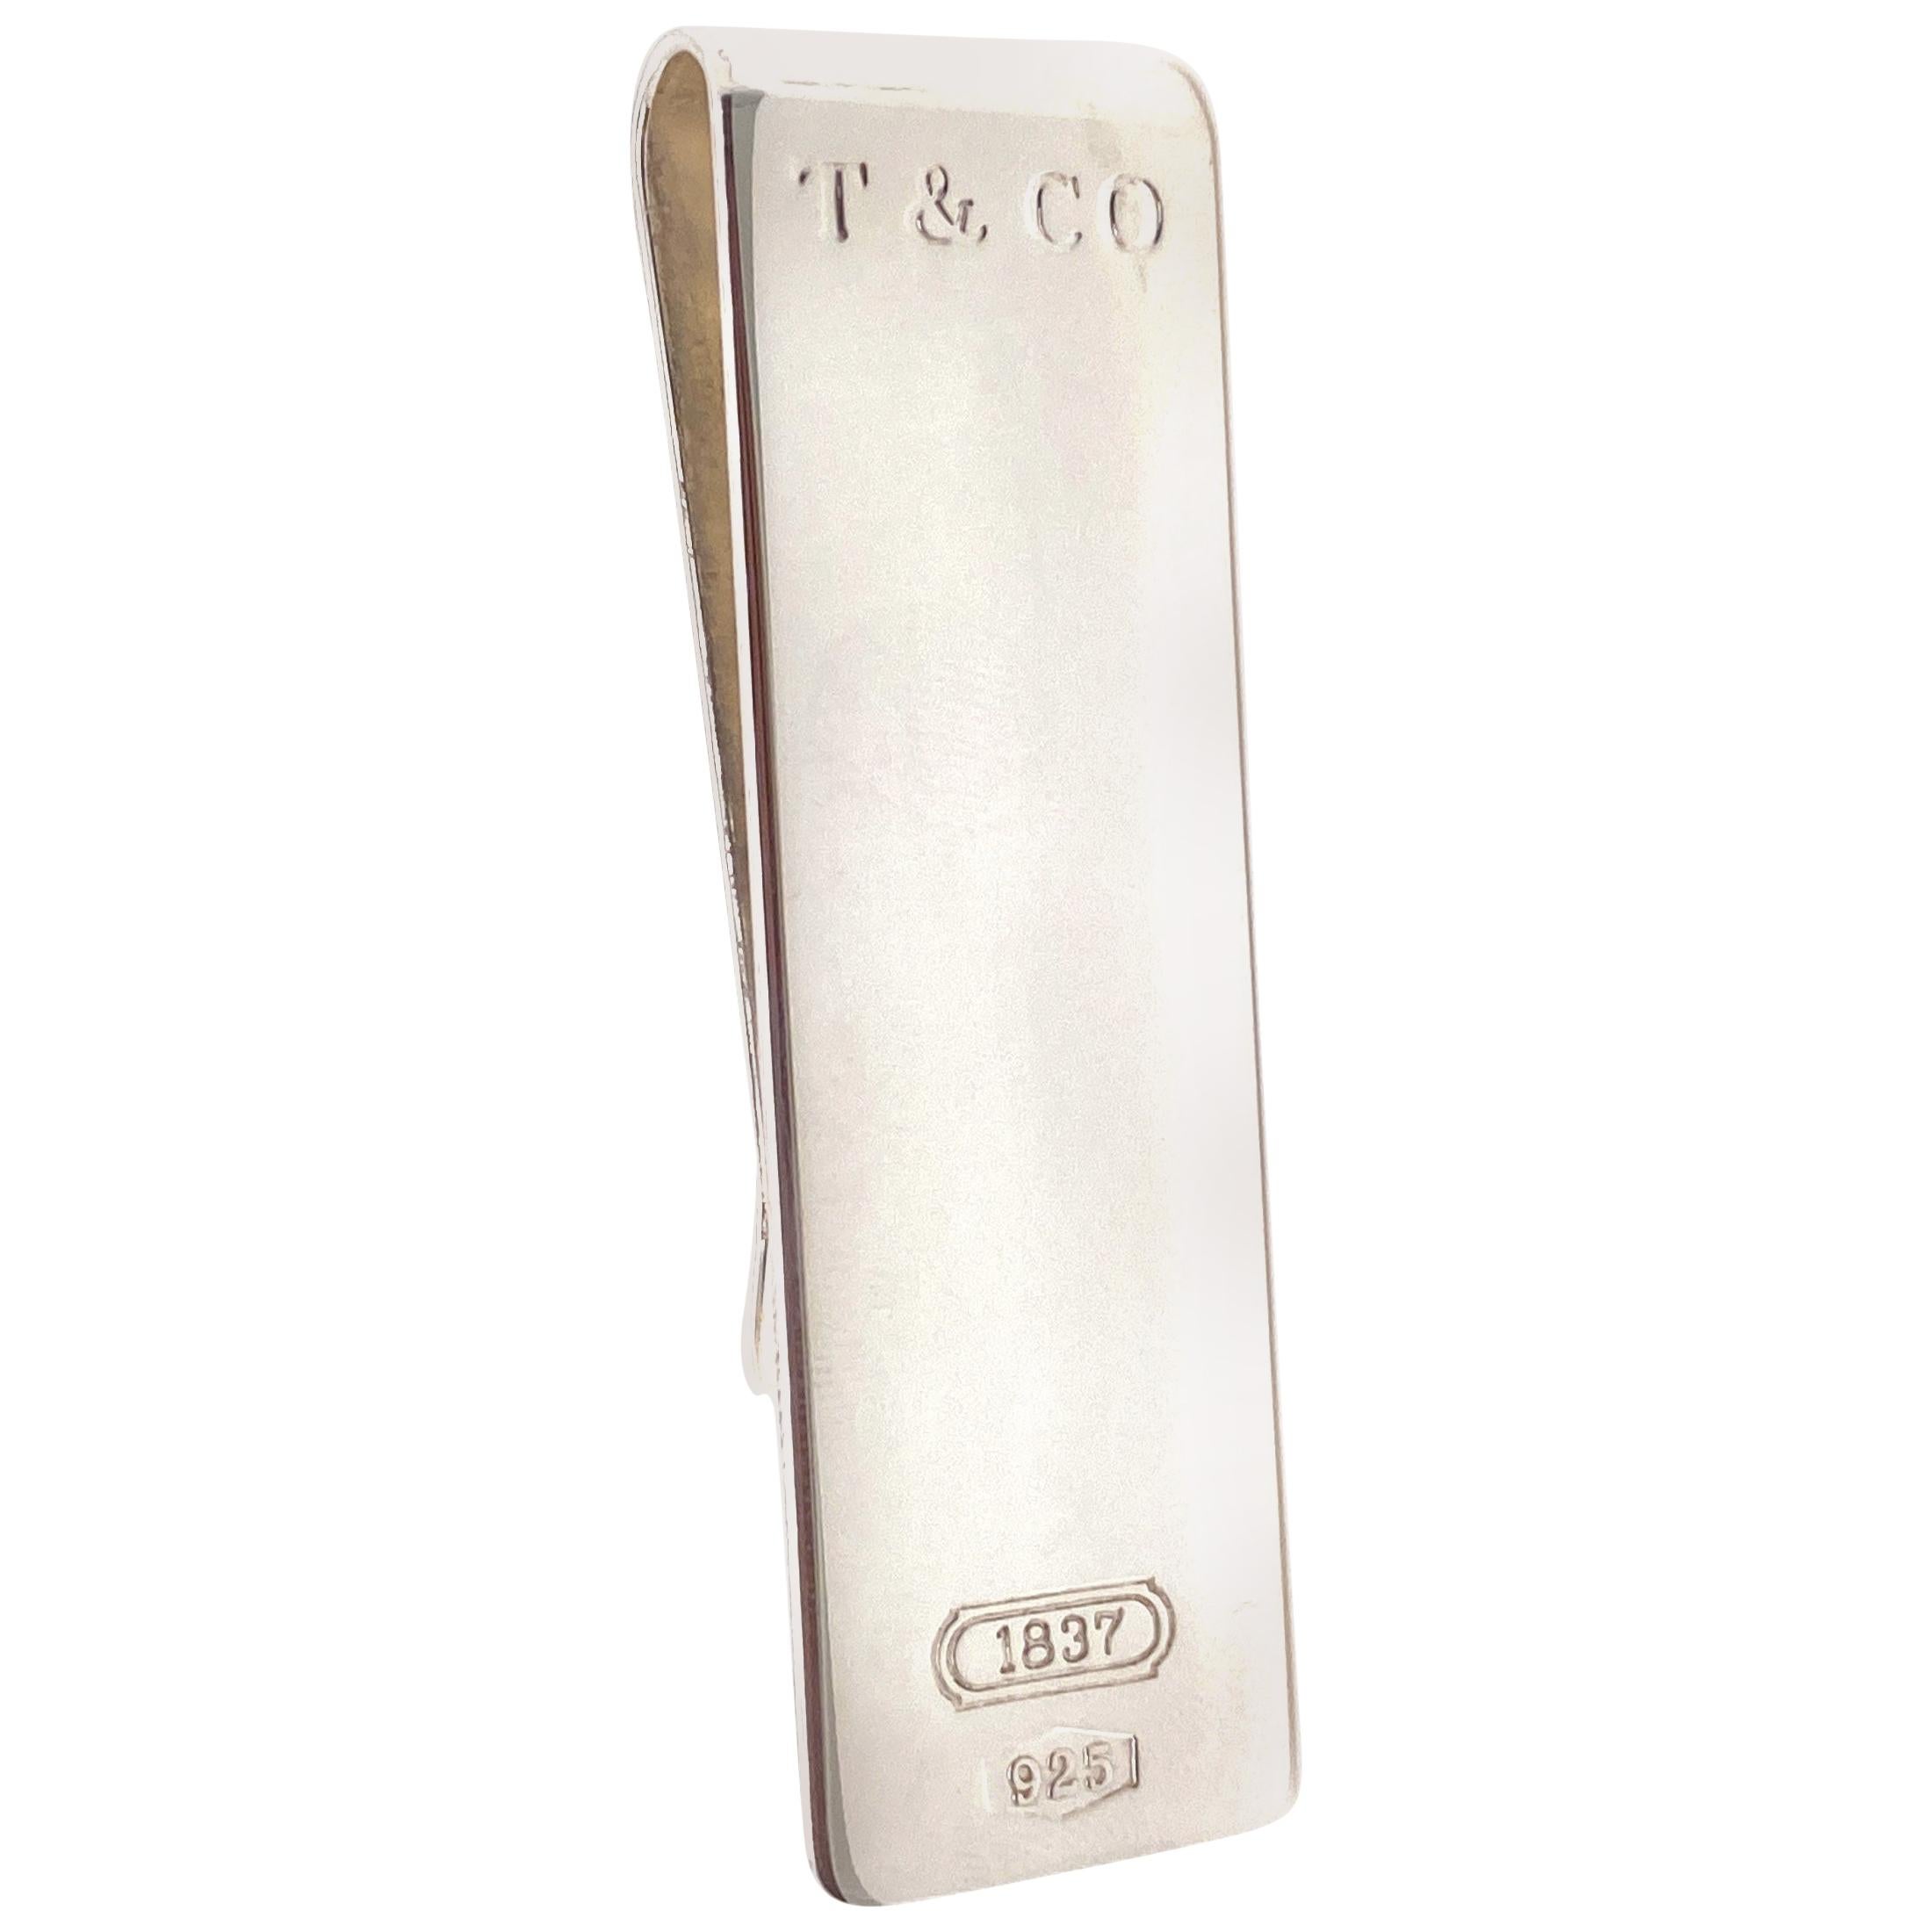 Tiffany & Co. 1837 Makers Narrow Money Clip in Sterling Silver